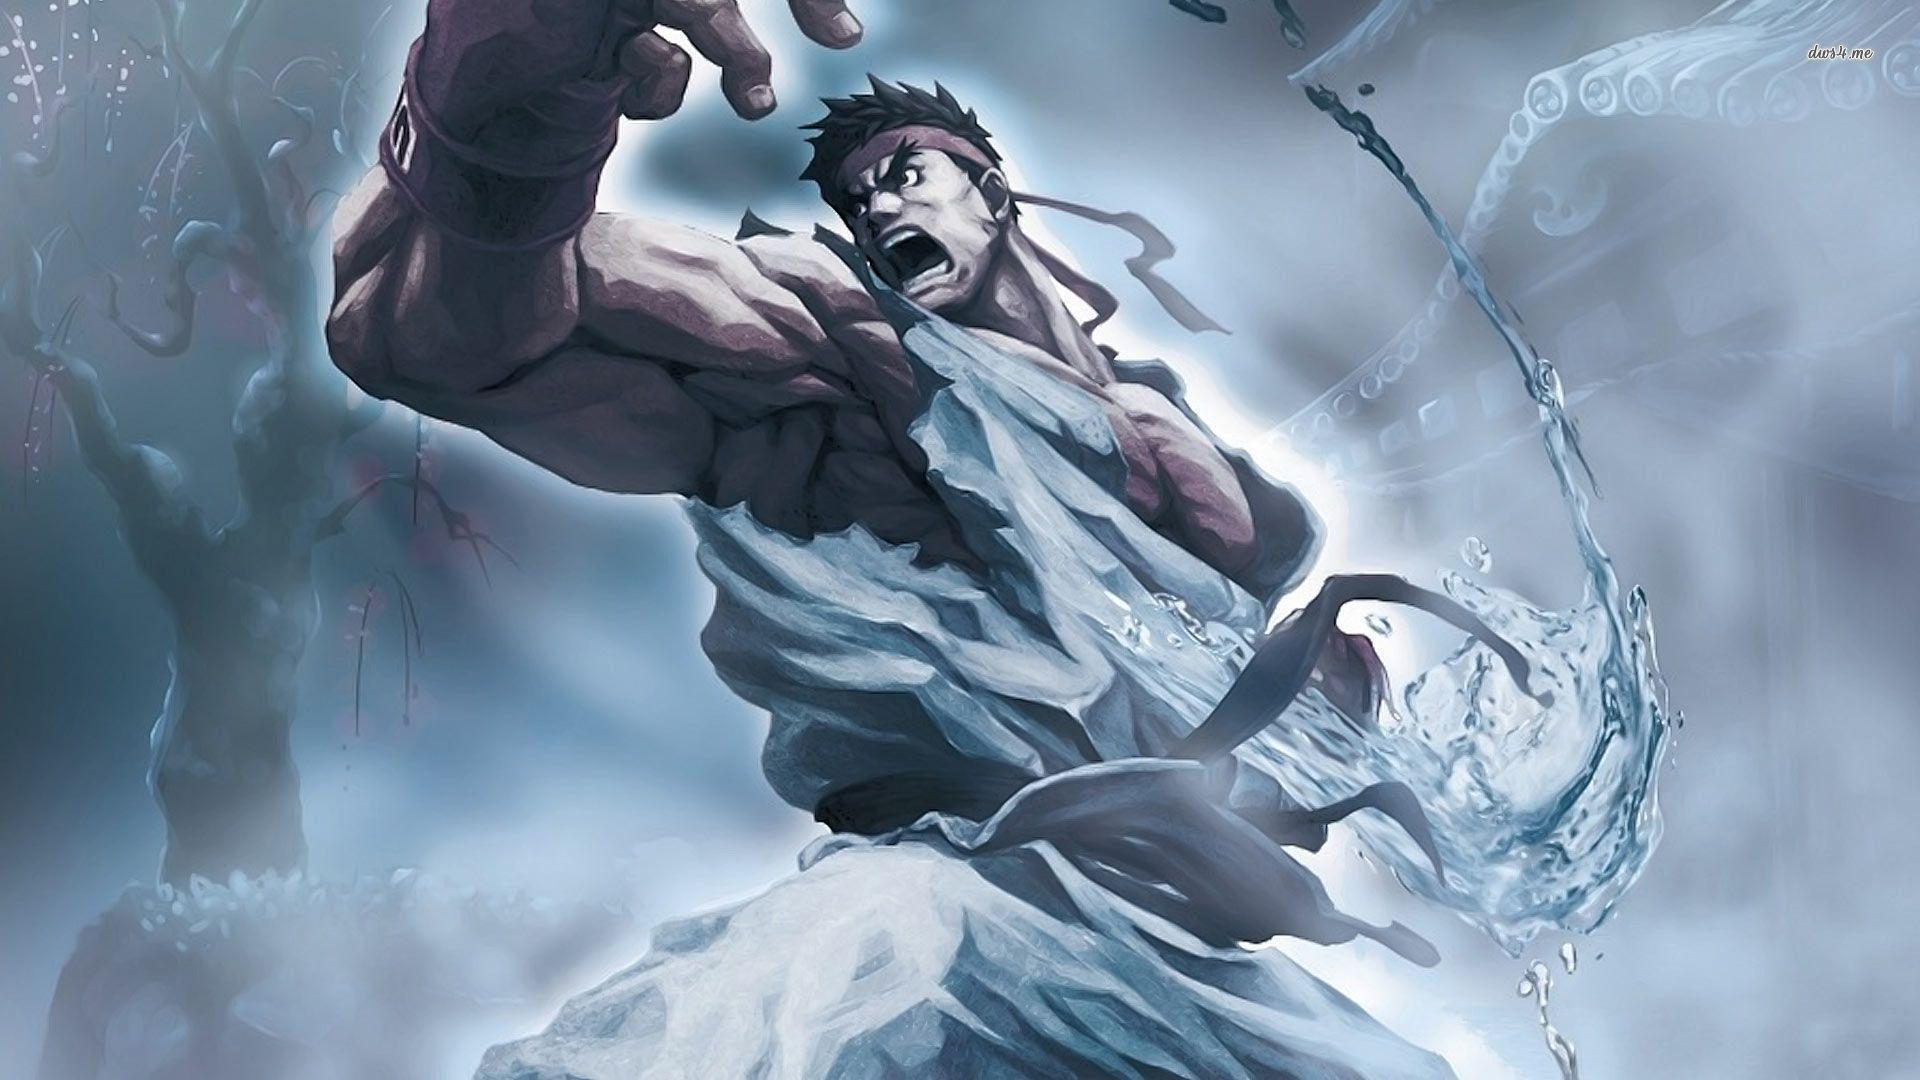 image For > Street Fighter Ryu Wallpaper HD